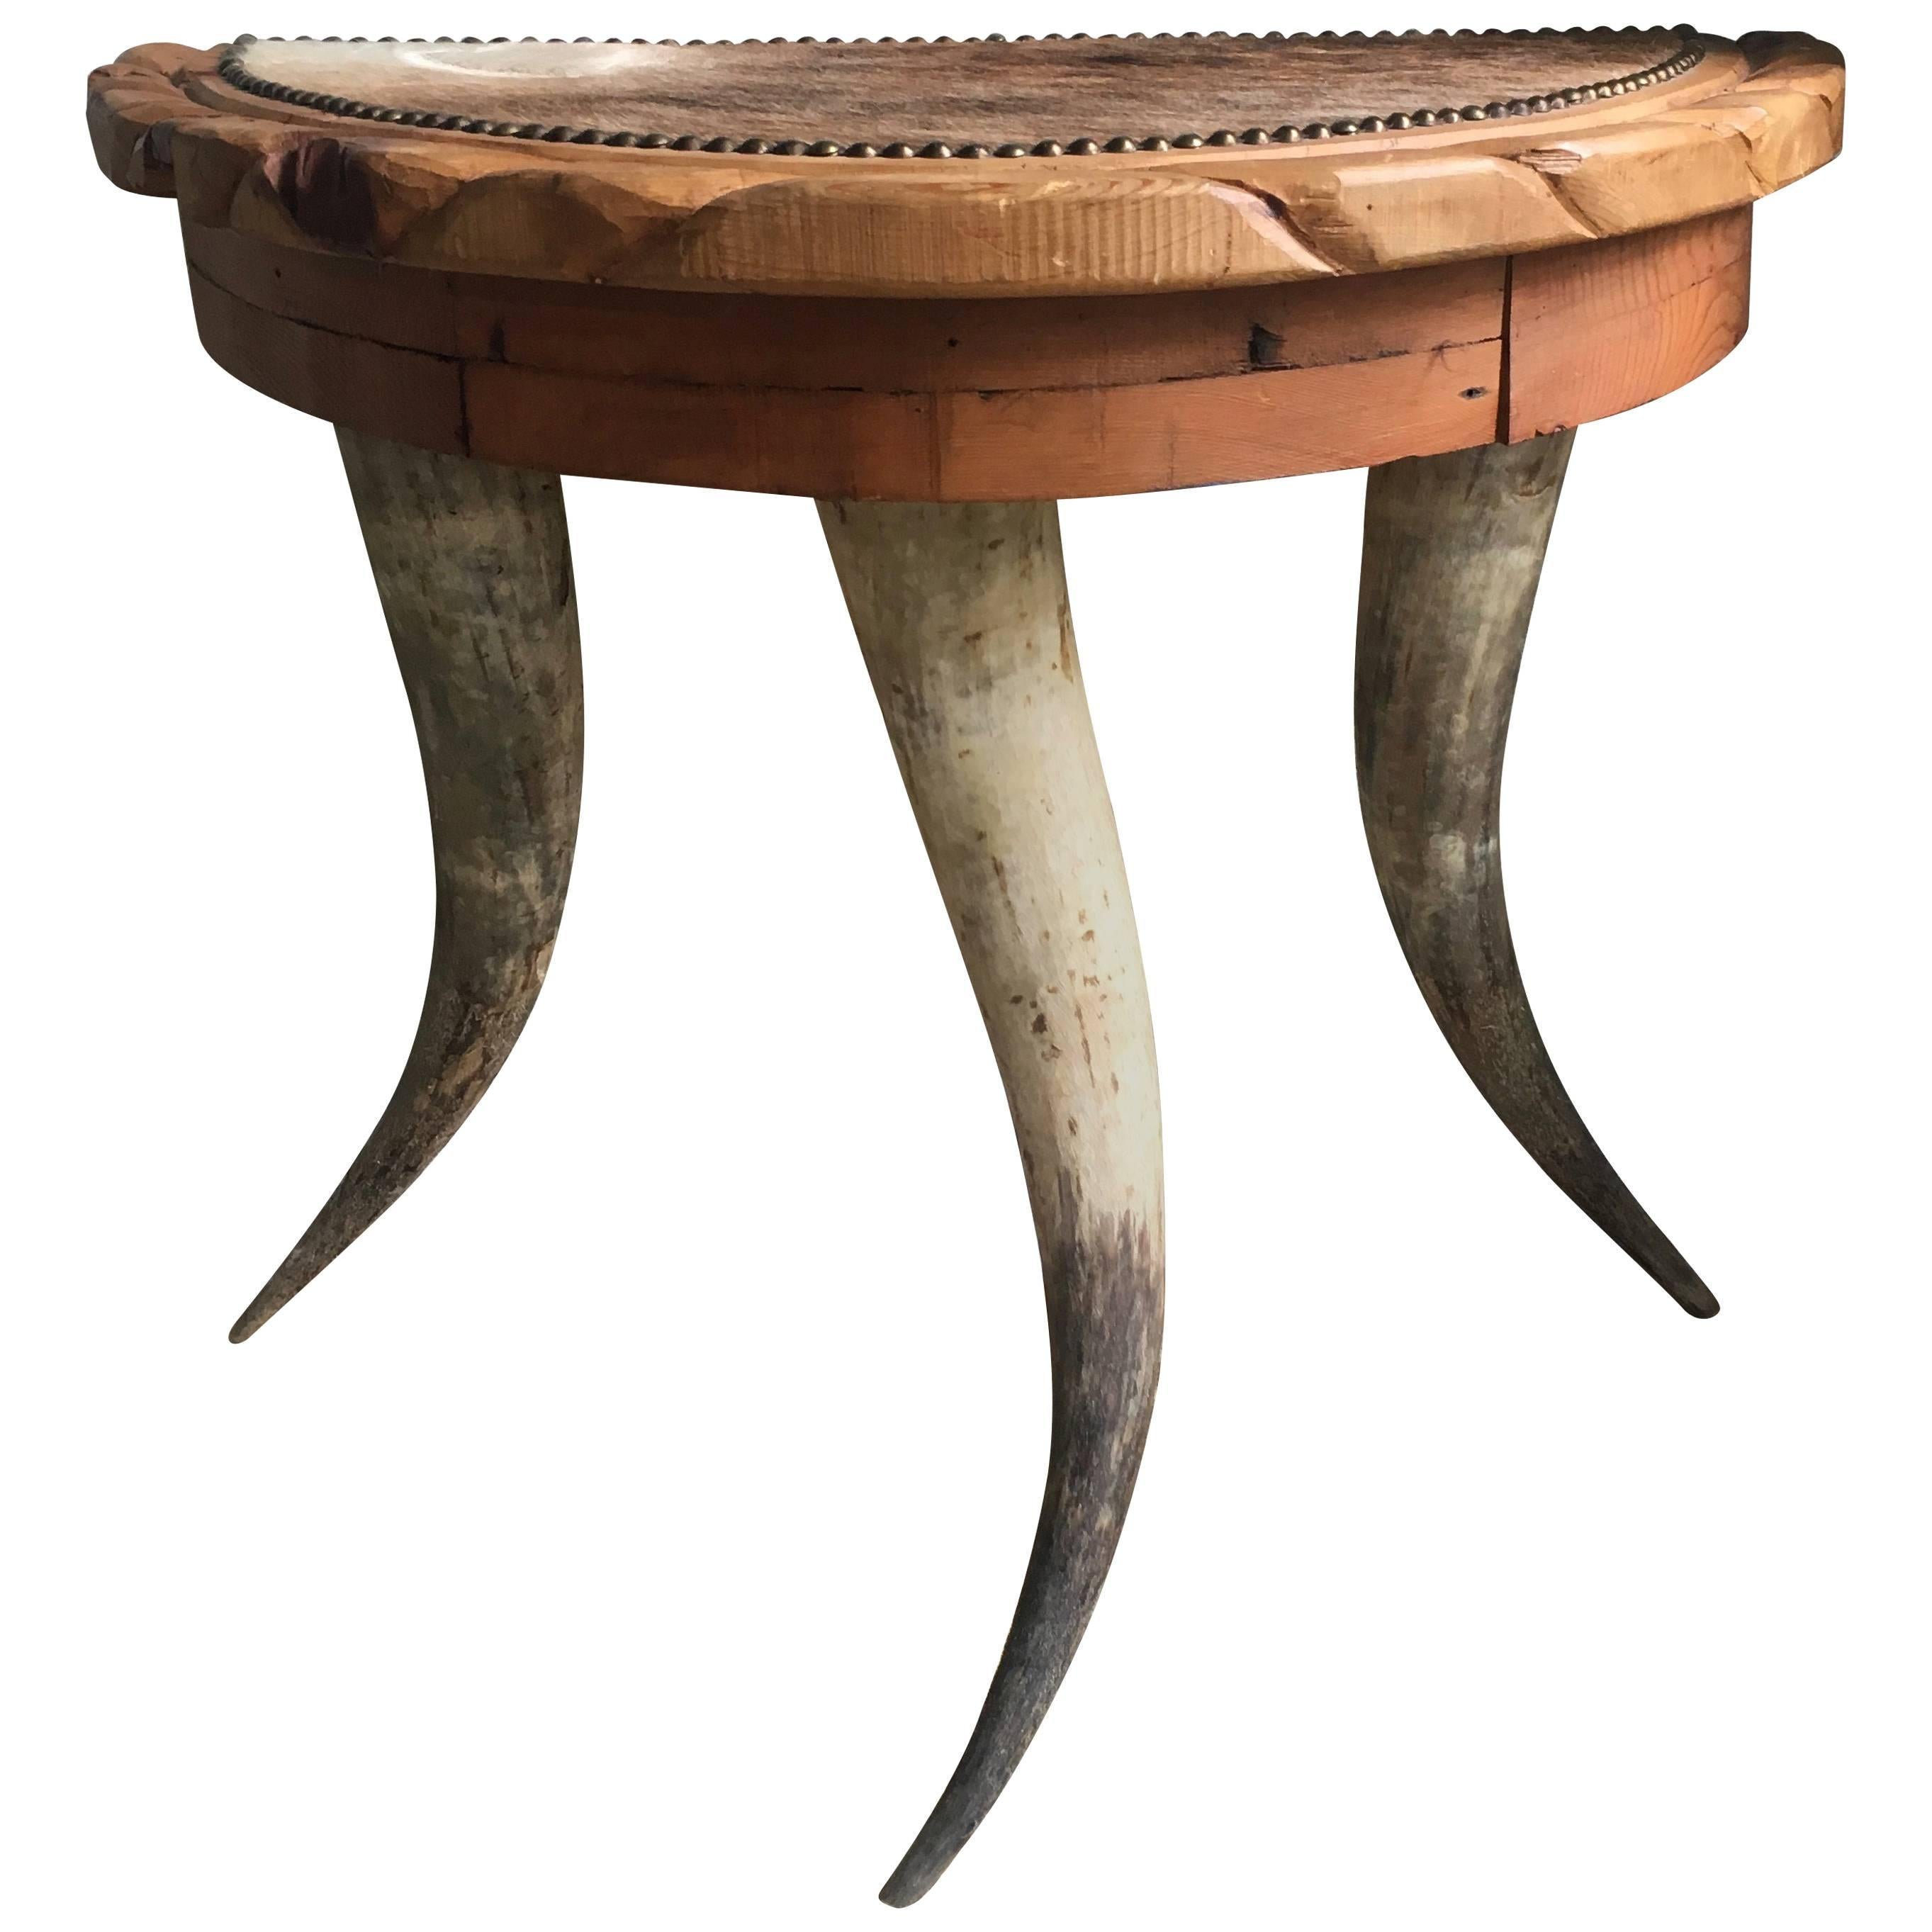 Demilune Antler Folk Art Table with Hide and Nailhead Top